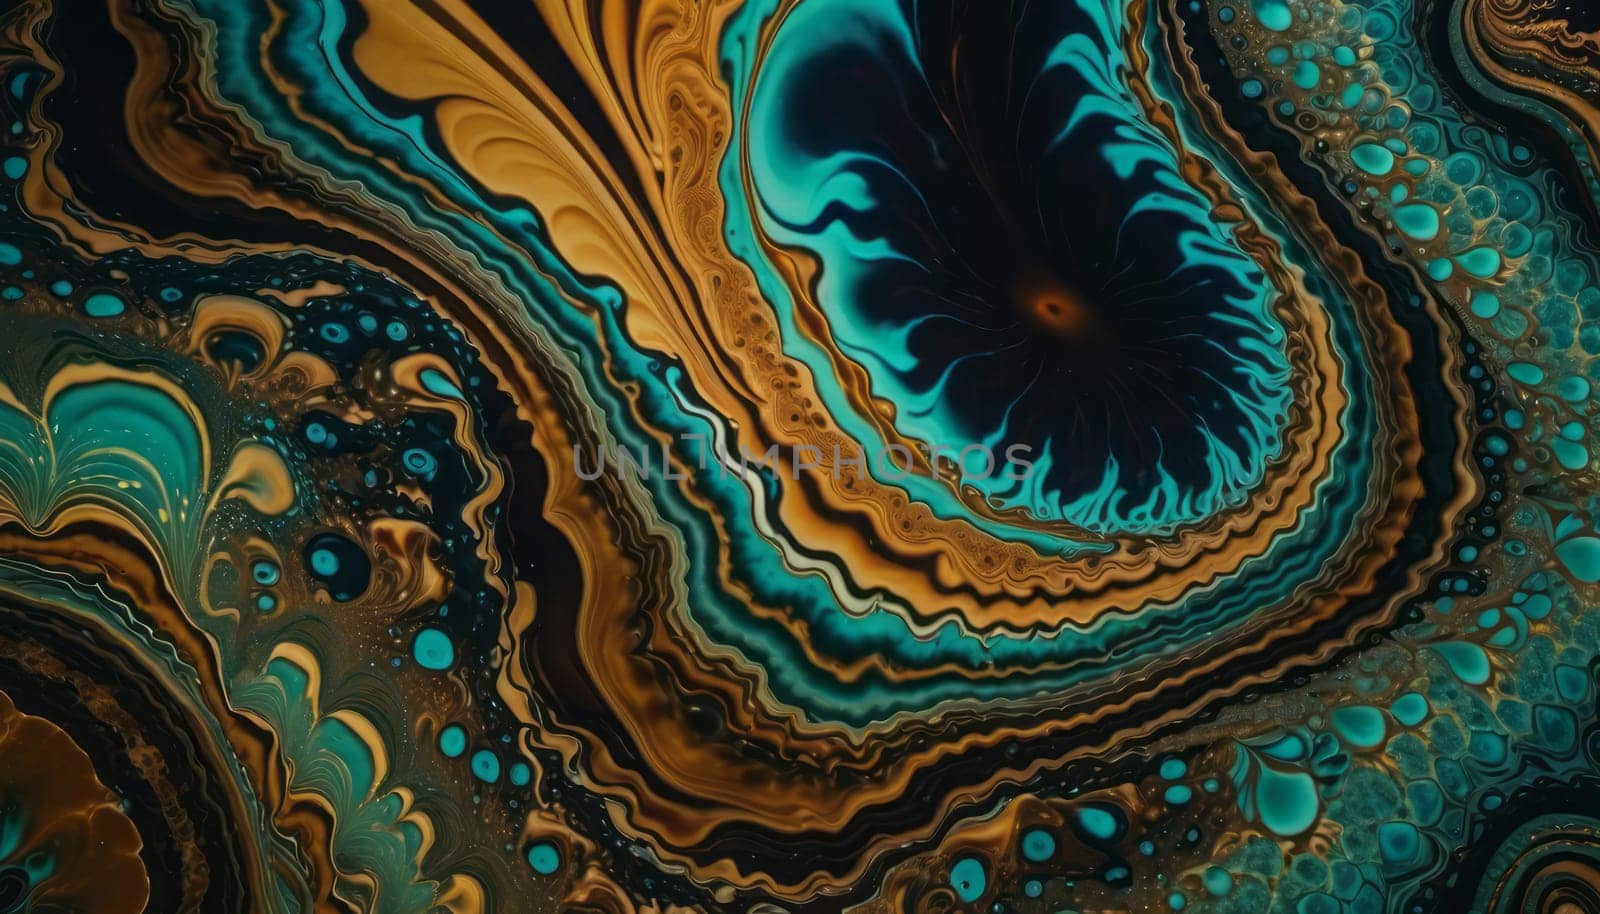 Dynamic Swirls of Blue and Gold by nkotlyar